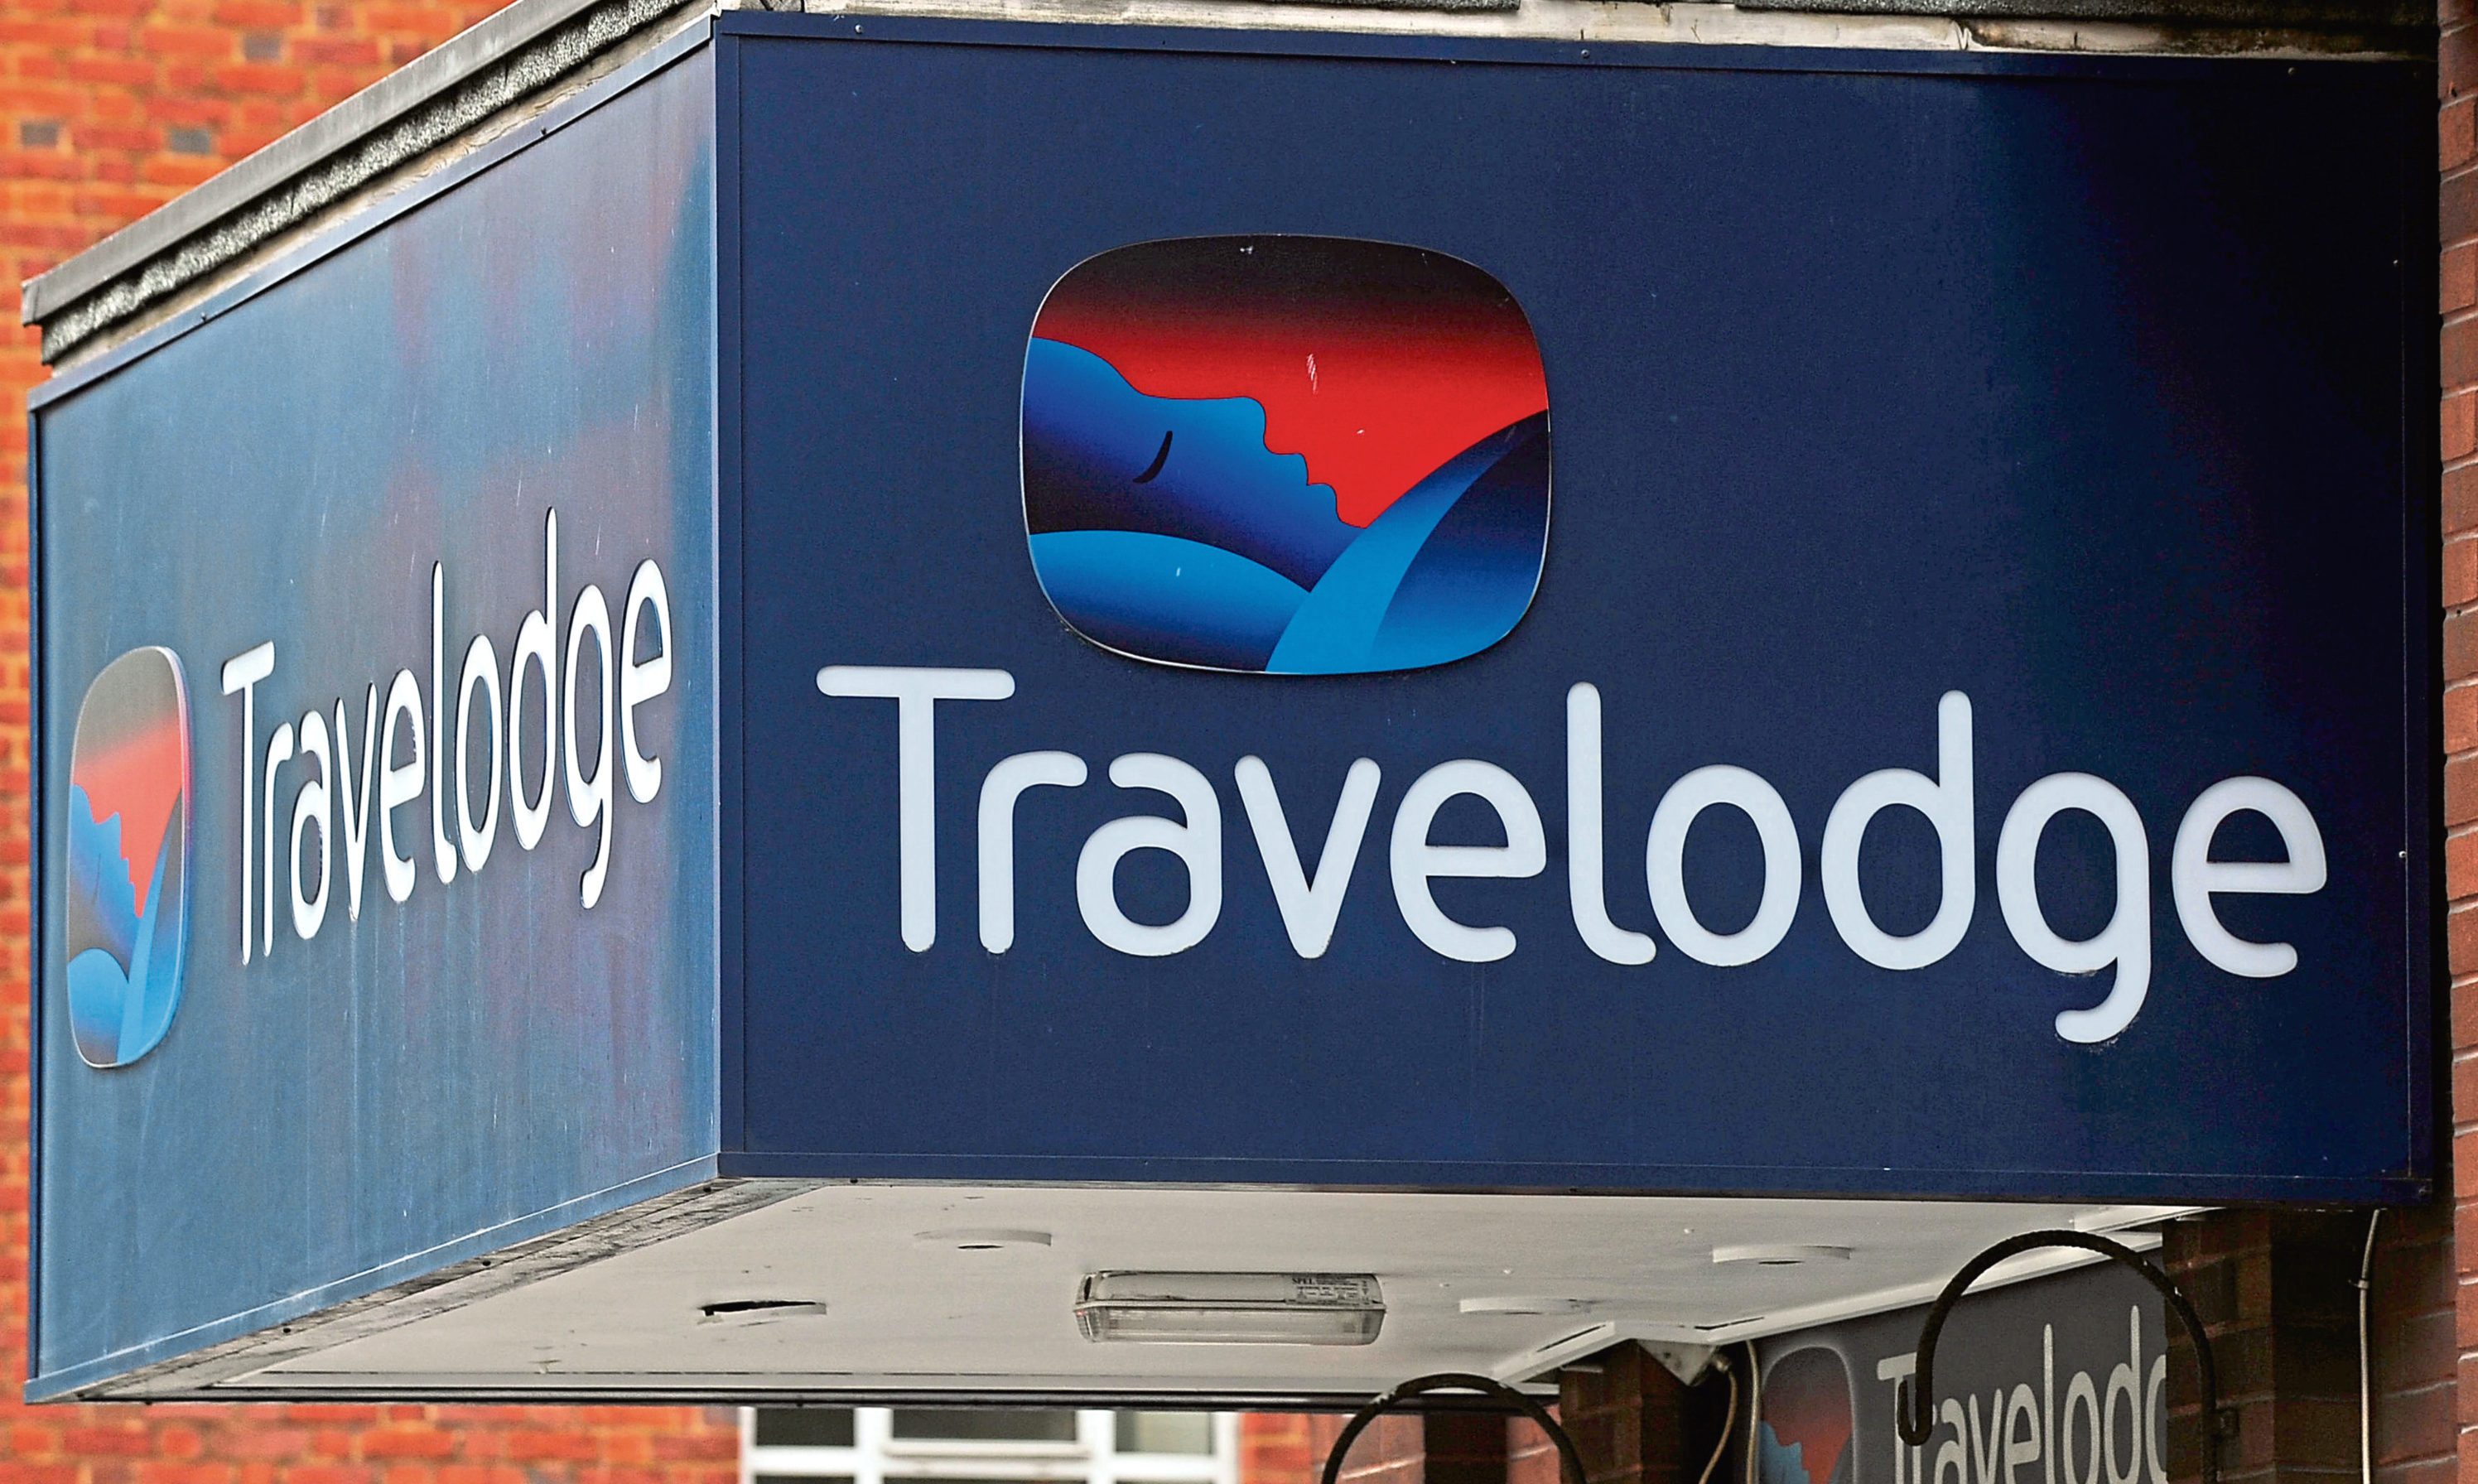 Travelodge said there was a growing trend of pets being left in rooms in 2018.